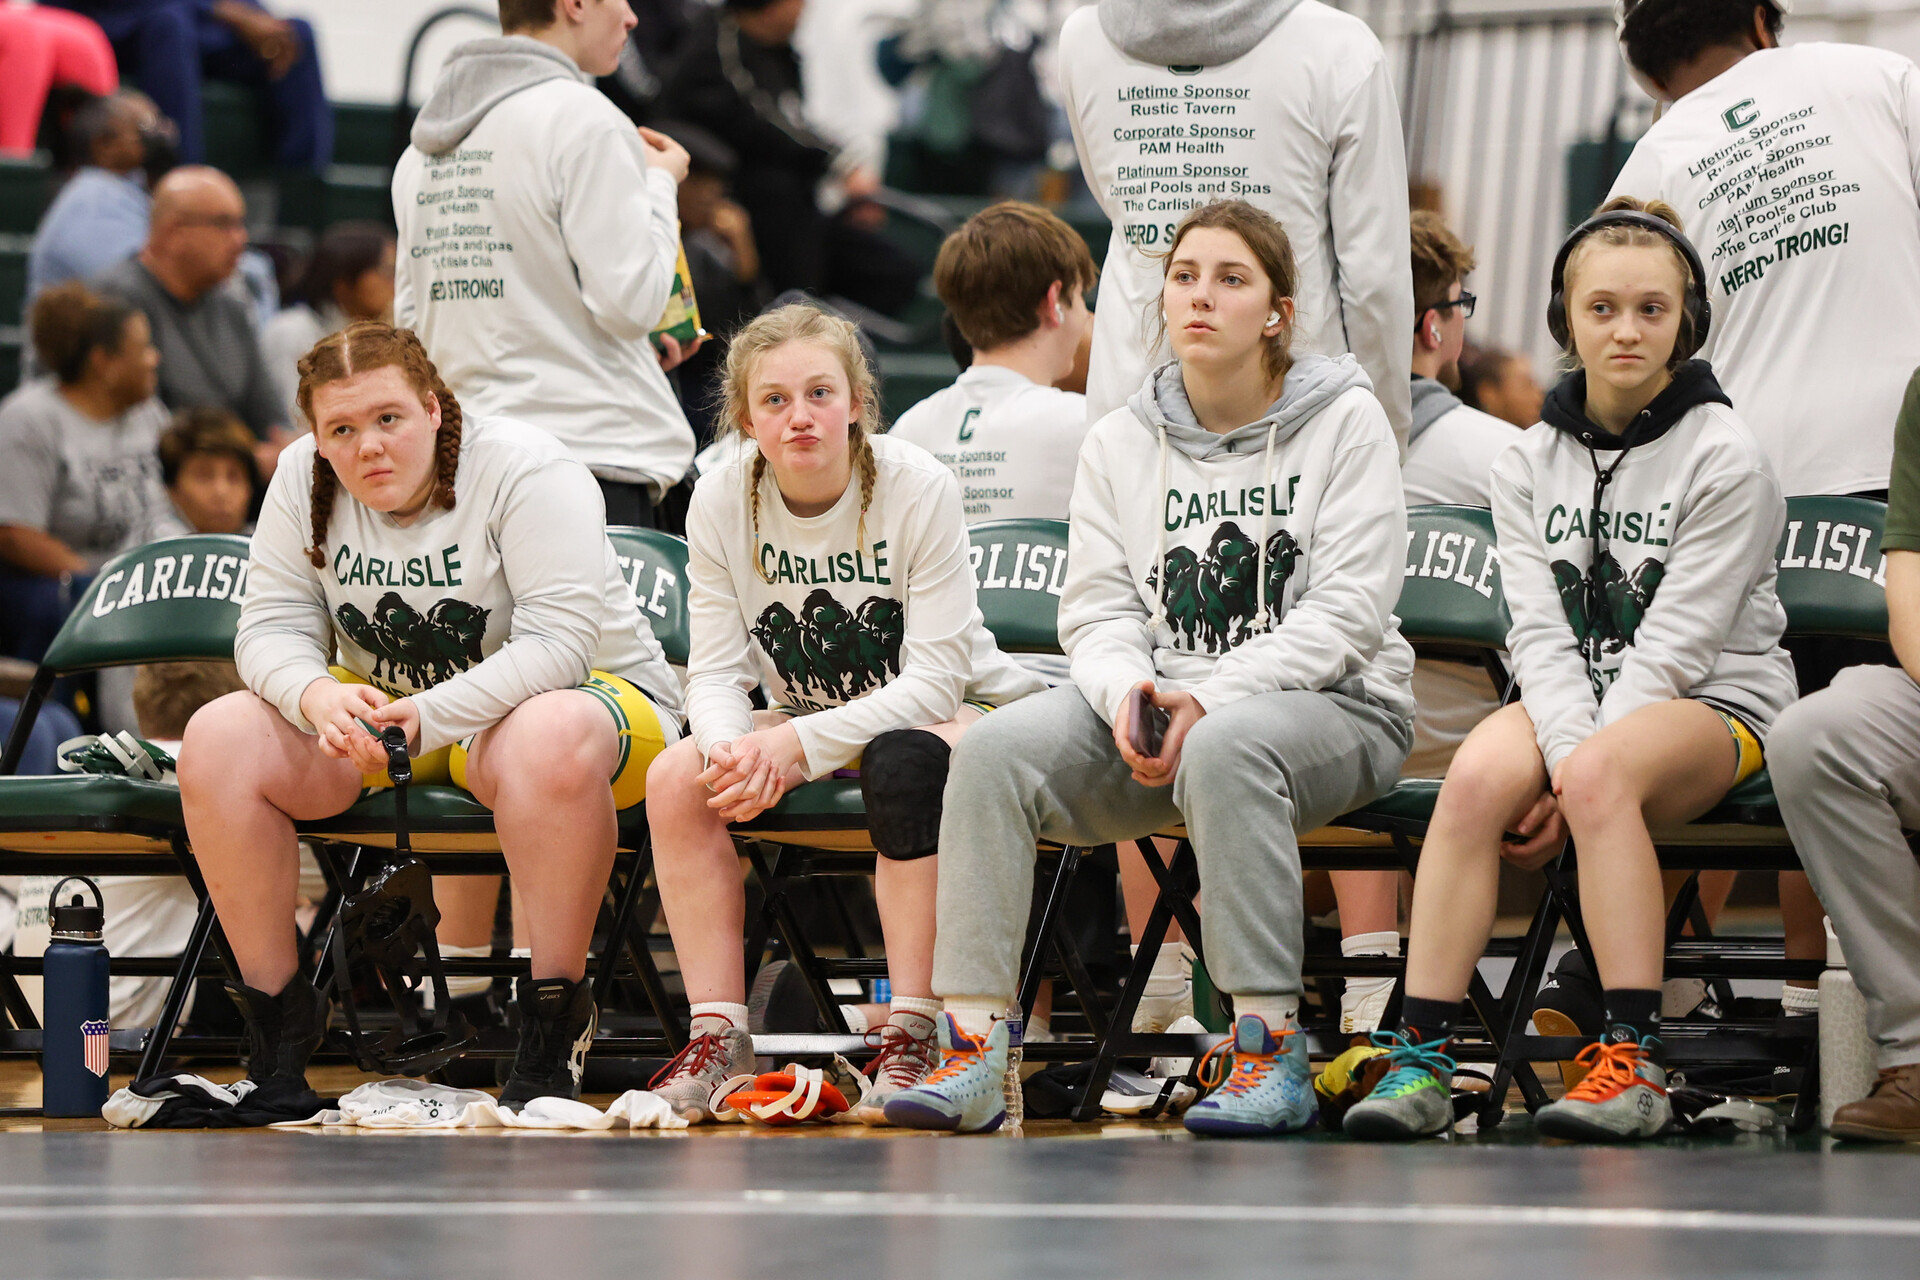 FOCUS: The girls wrestling team focuses as they wait for their time to shine on the mat.